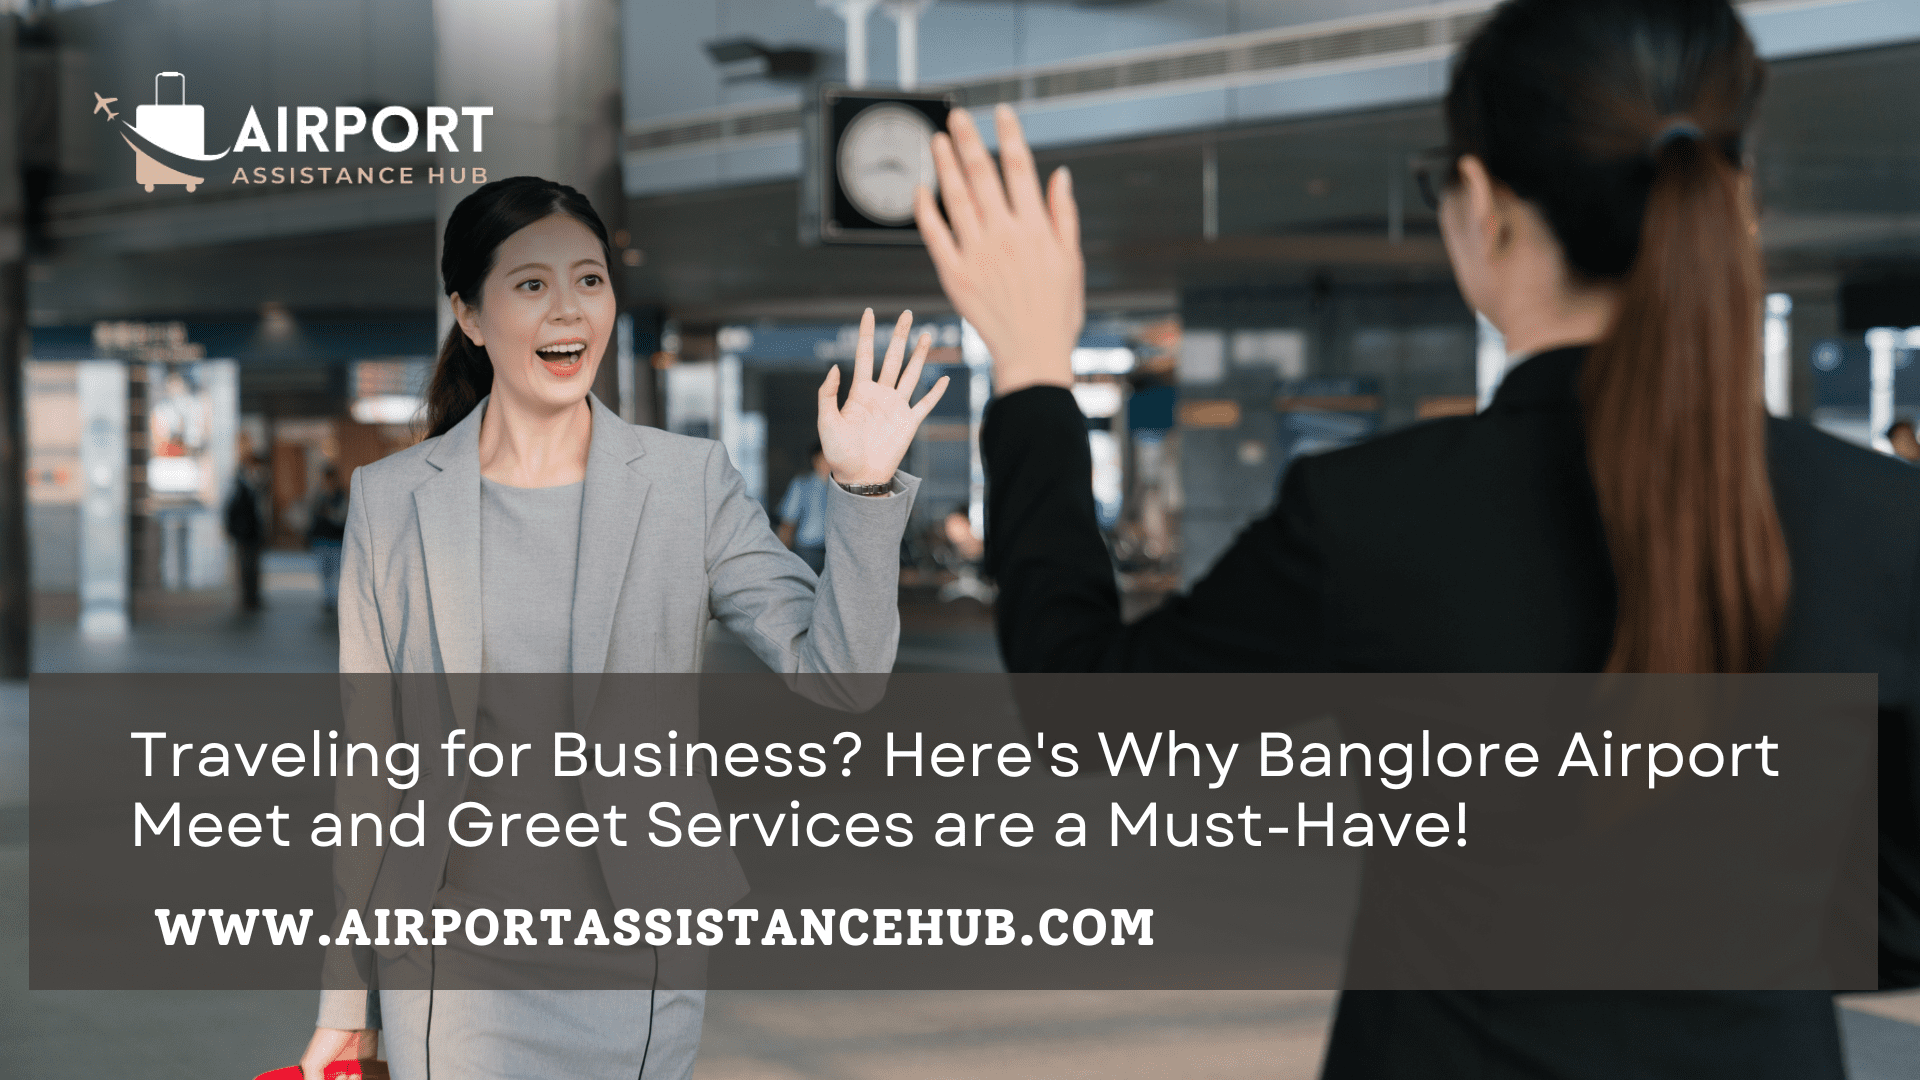 Banglore Airport Meet and Greet Service